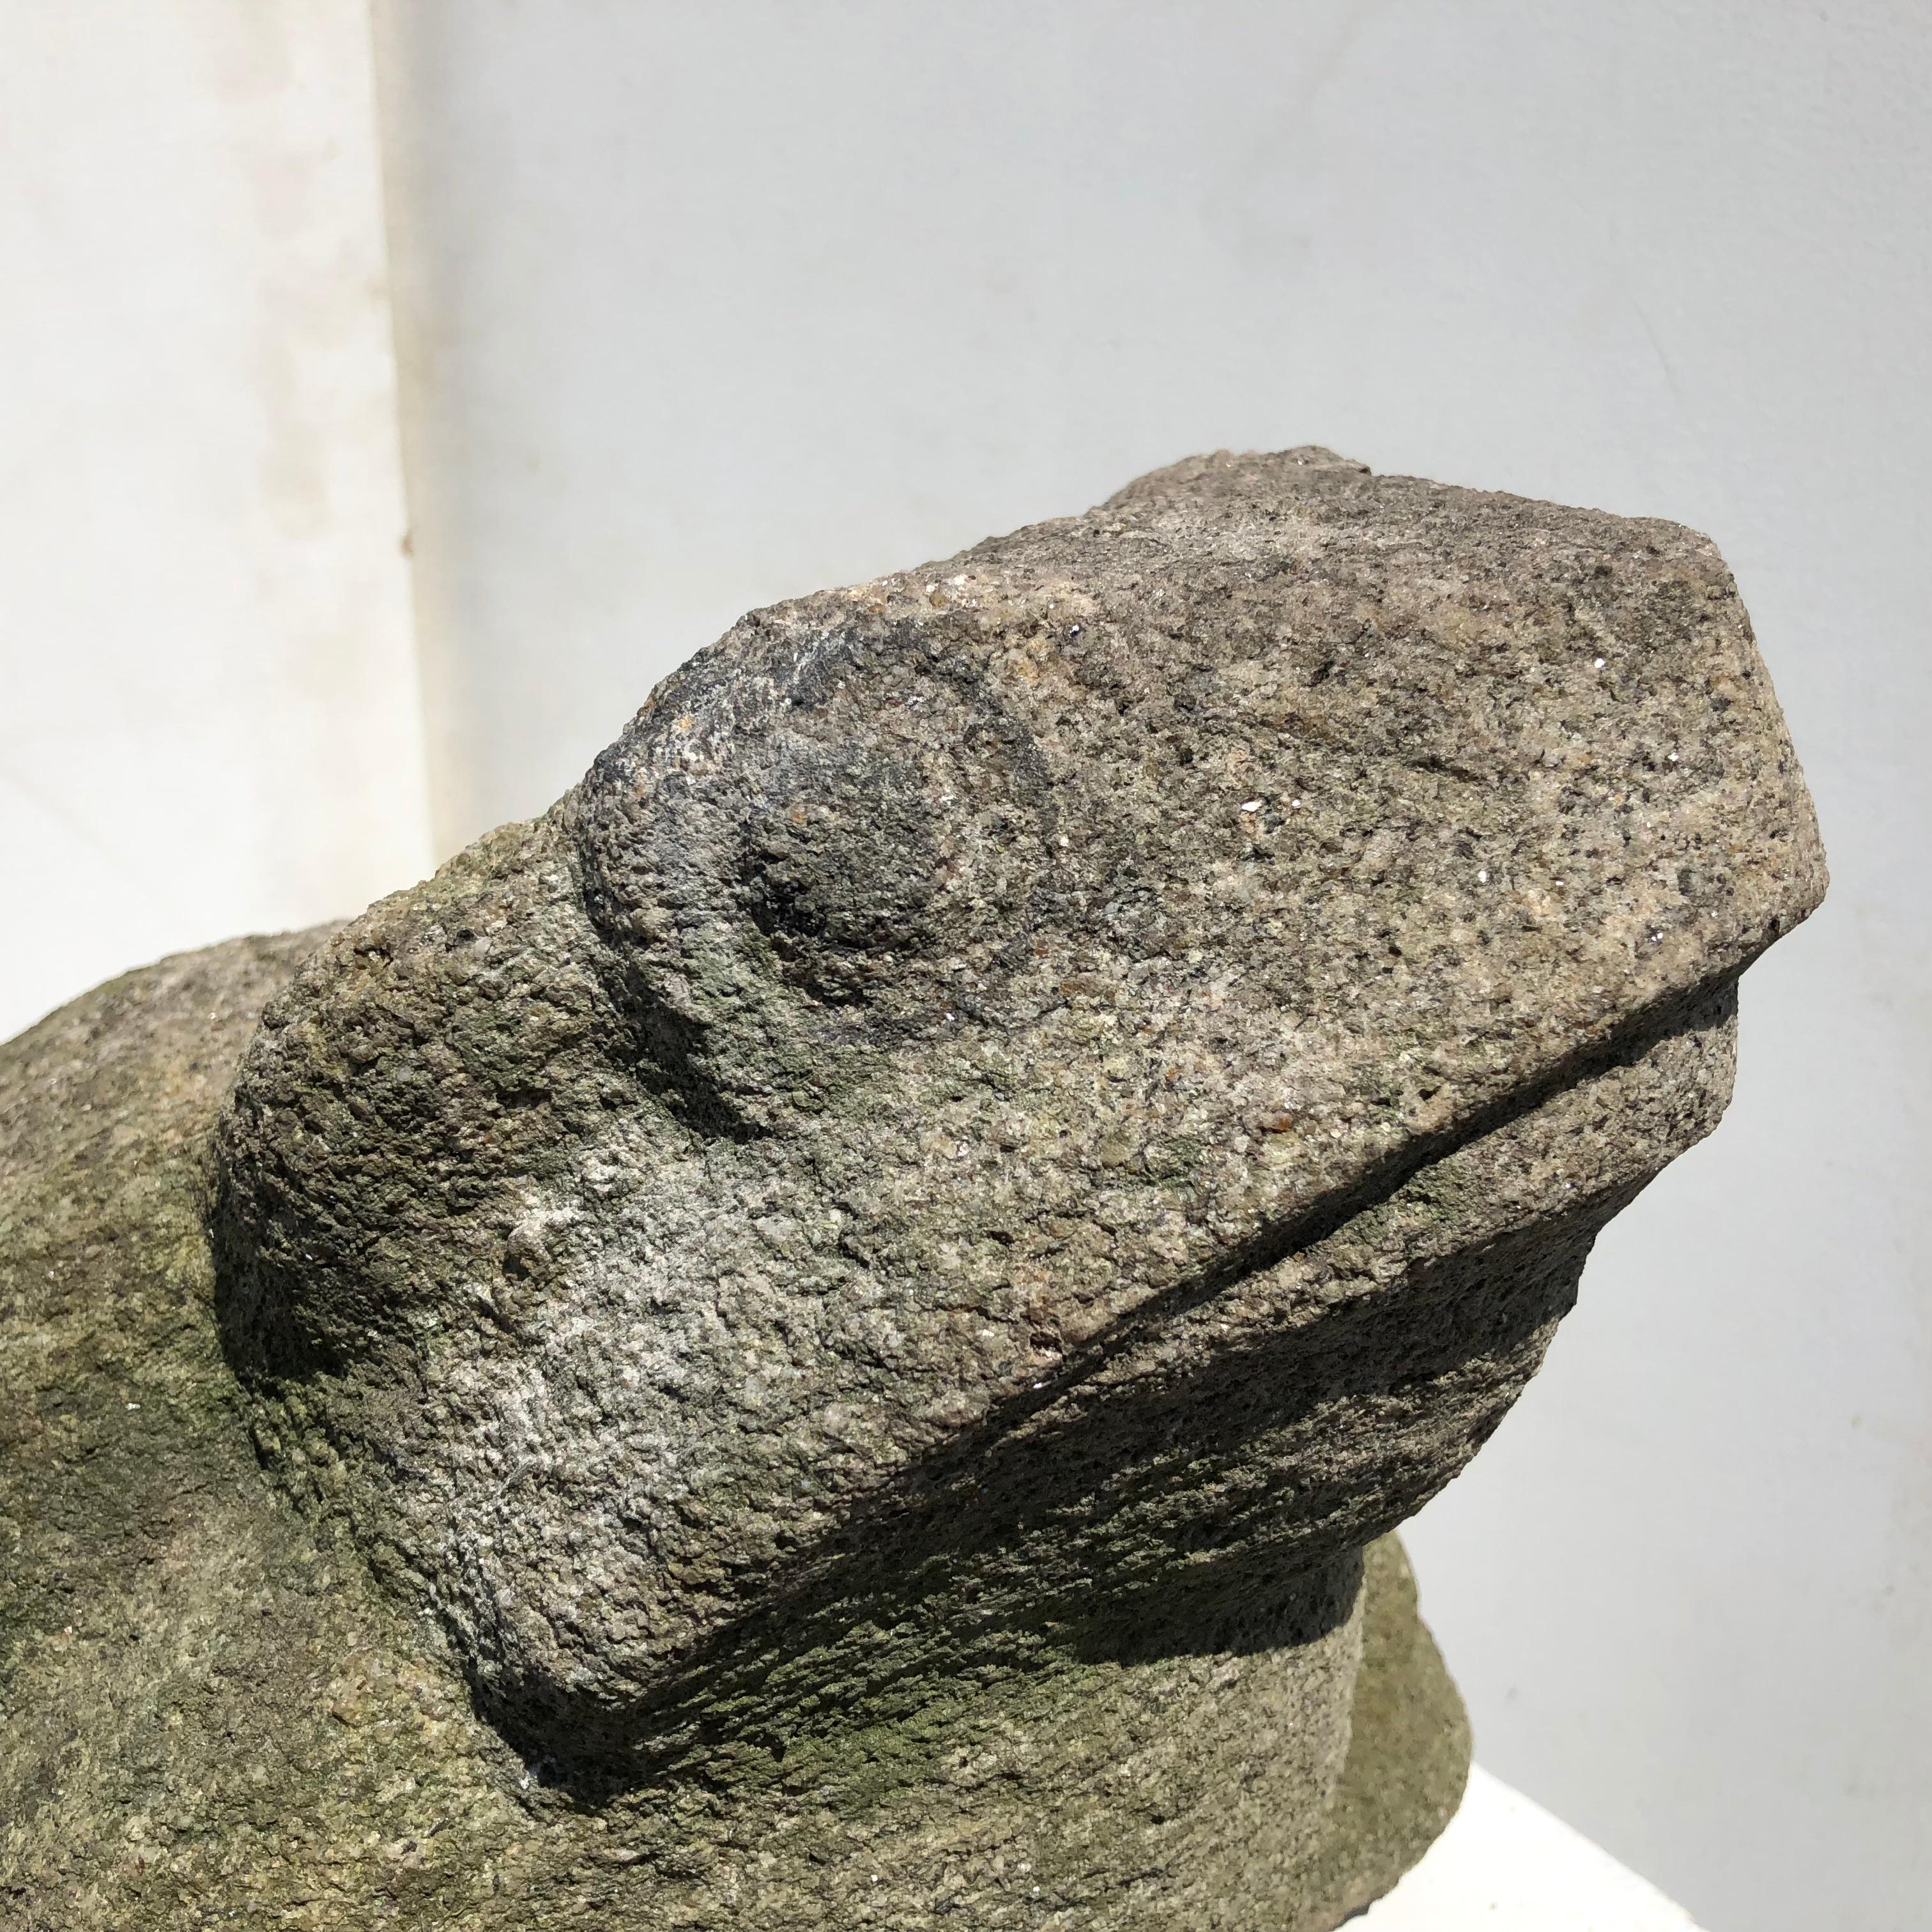 Granite Big Old Japanese Stone Garden Frog Brings Joy and Soul to Your Sacred Space